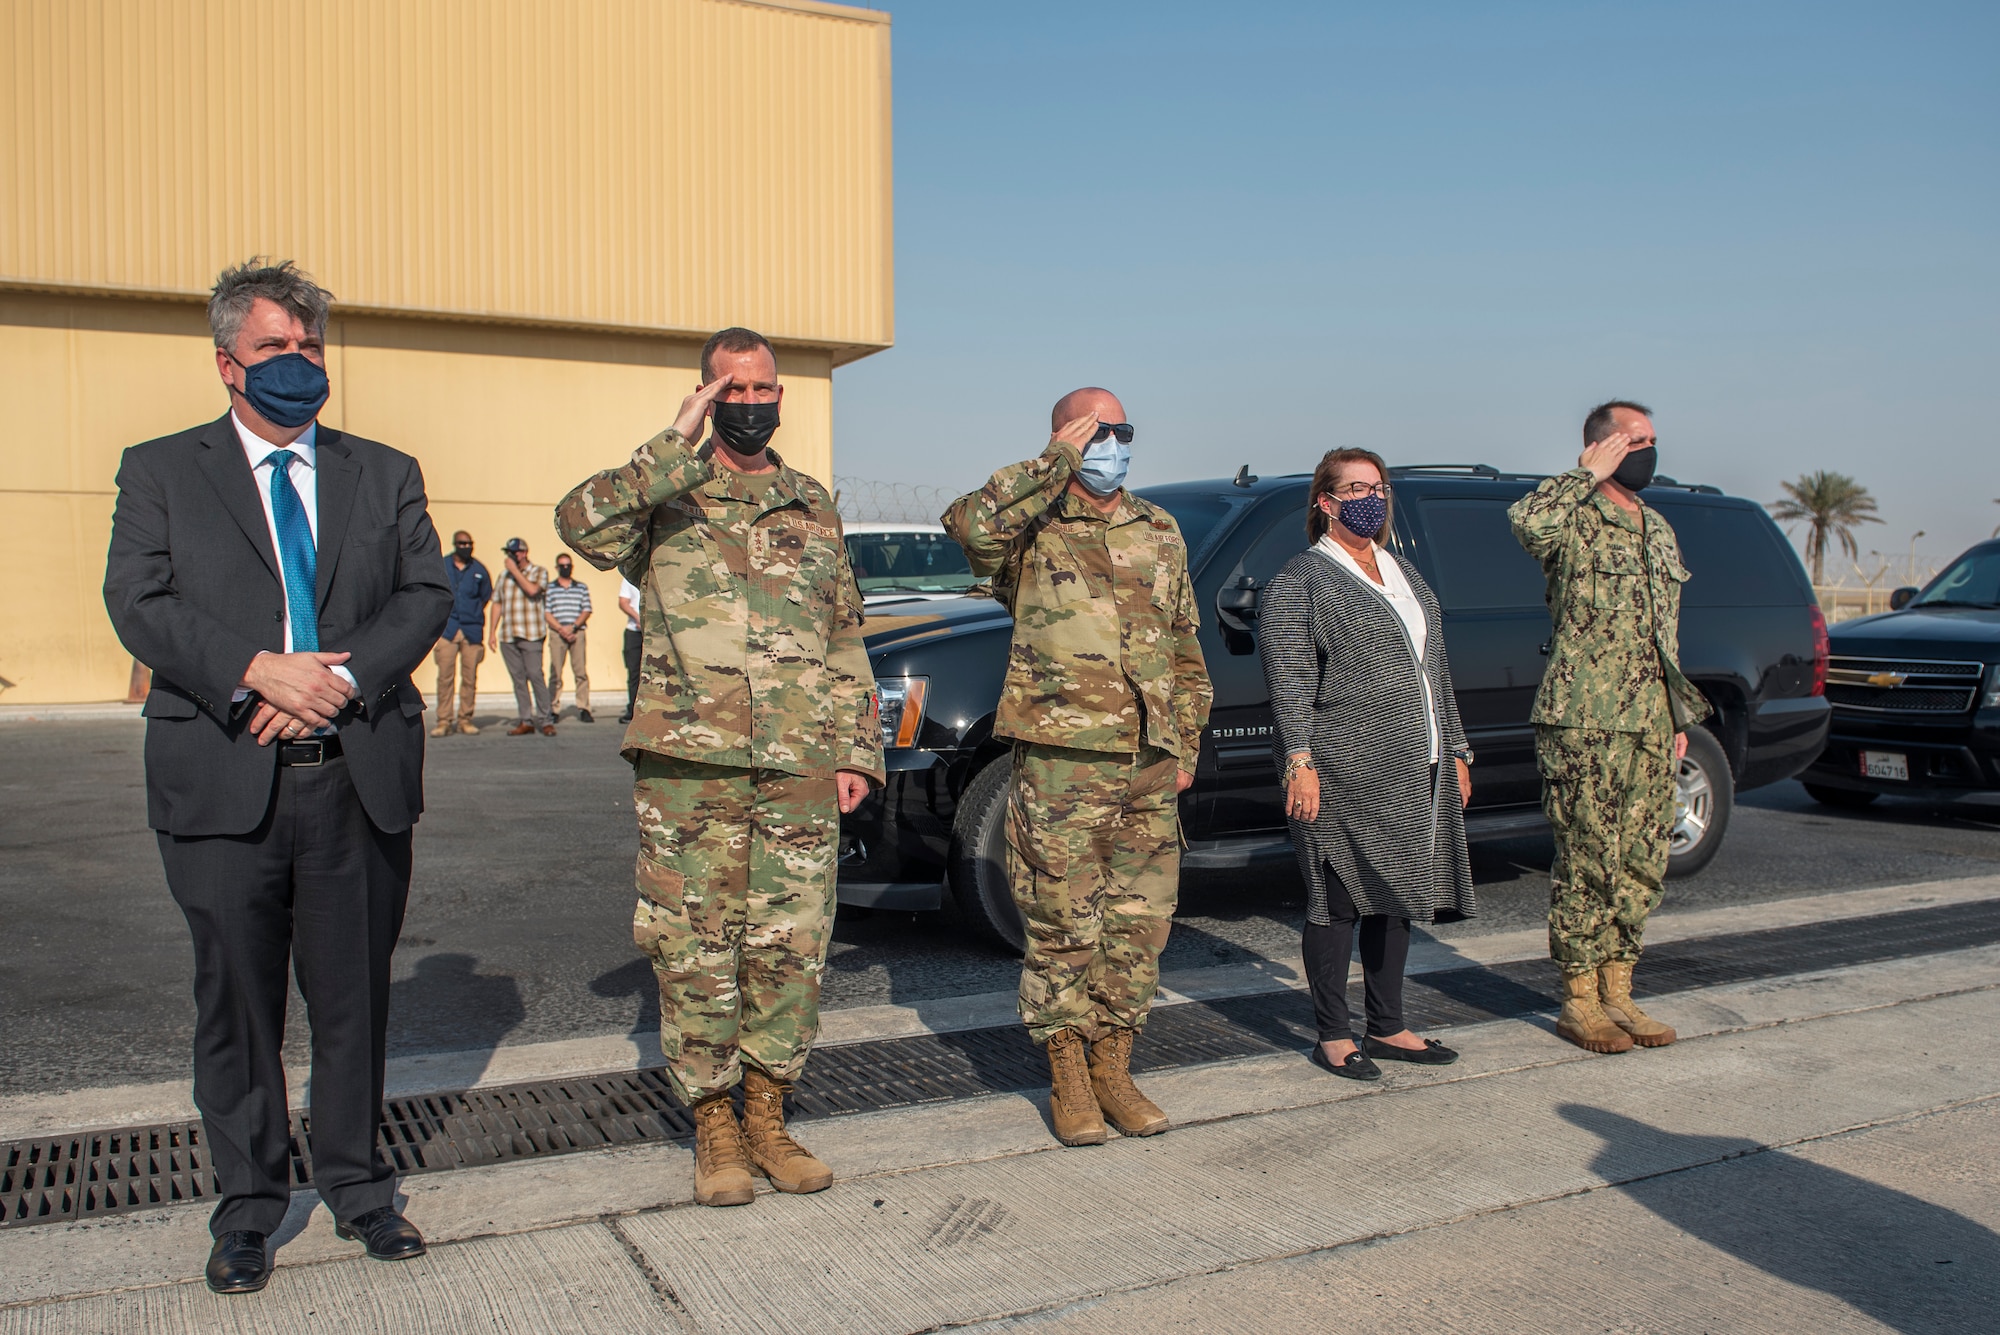 Austin visited the installation to thank service members for their support and dedication to the Afghanistan evacuation operations, where more than 55,000 evacuees were temporarily housed during transit and processed forward to their next location. (U.S. Air Force photo by Senior Airman Kylie Barrow)